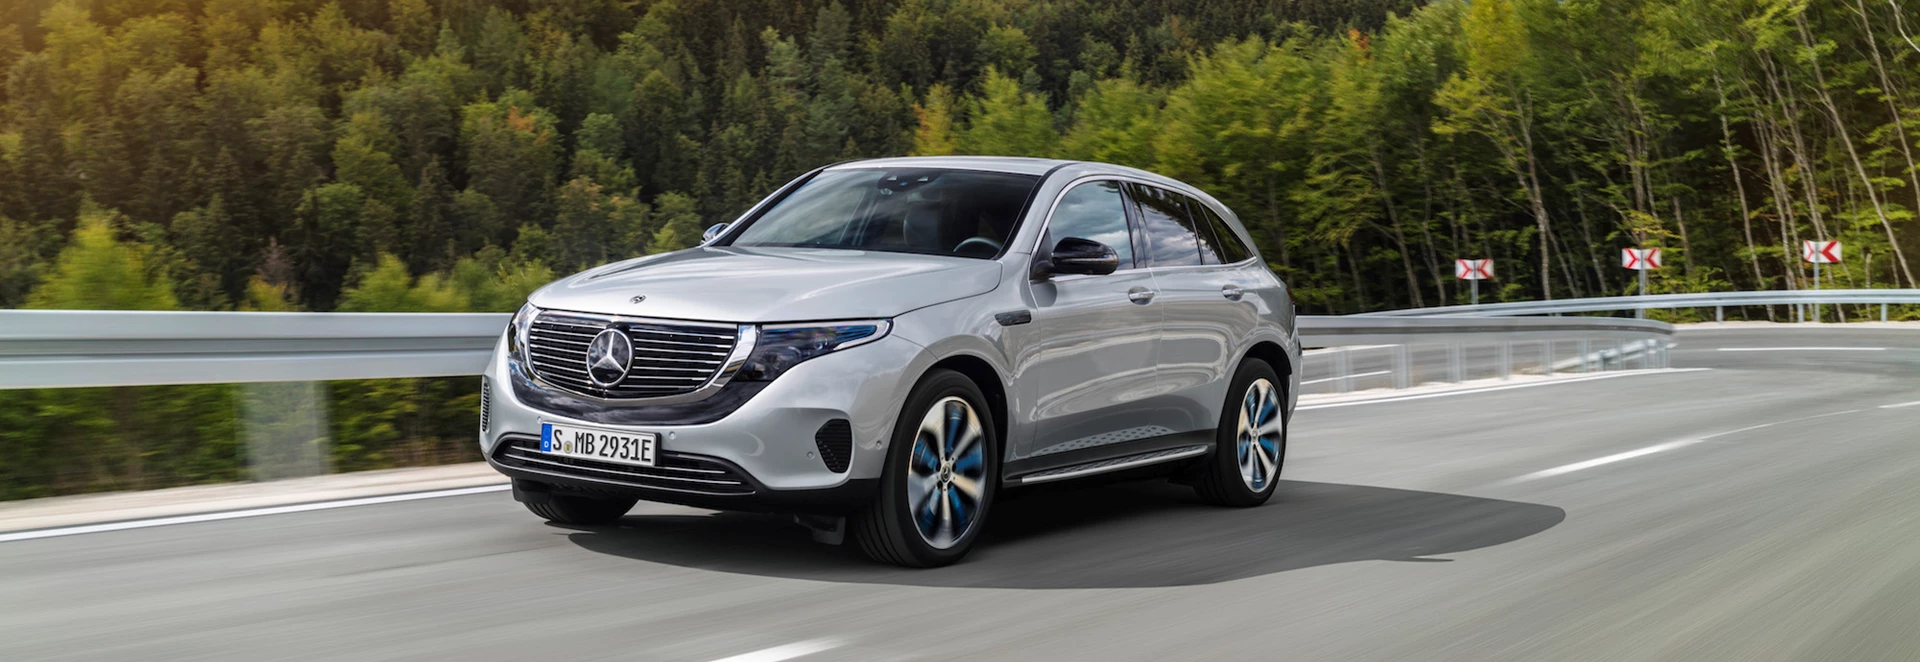 Mercedes takes covers off EQC all-electric SUV